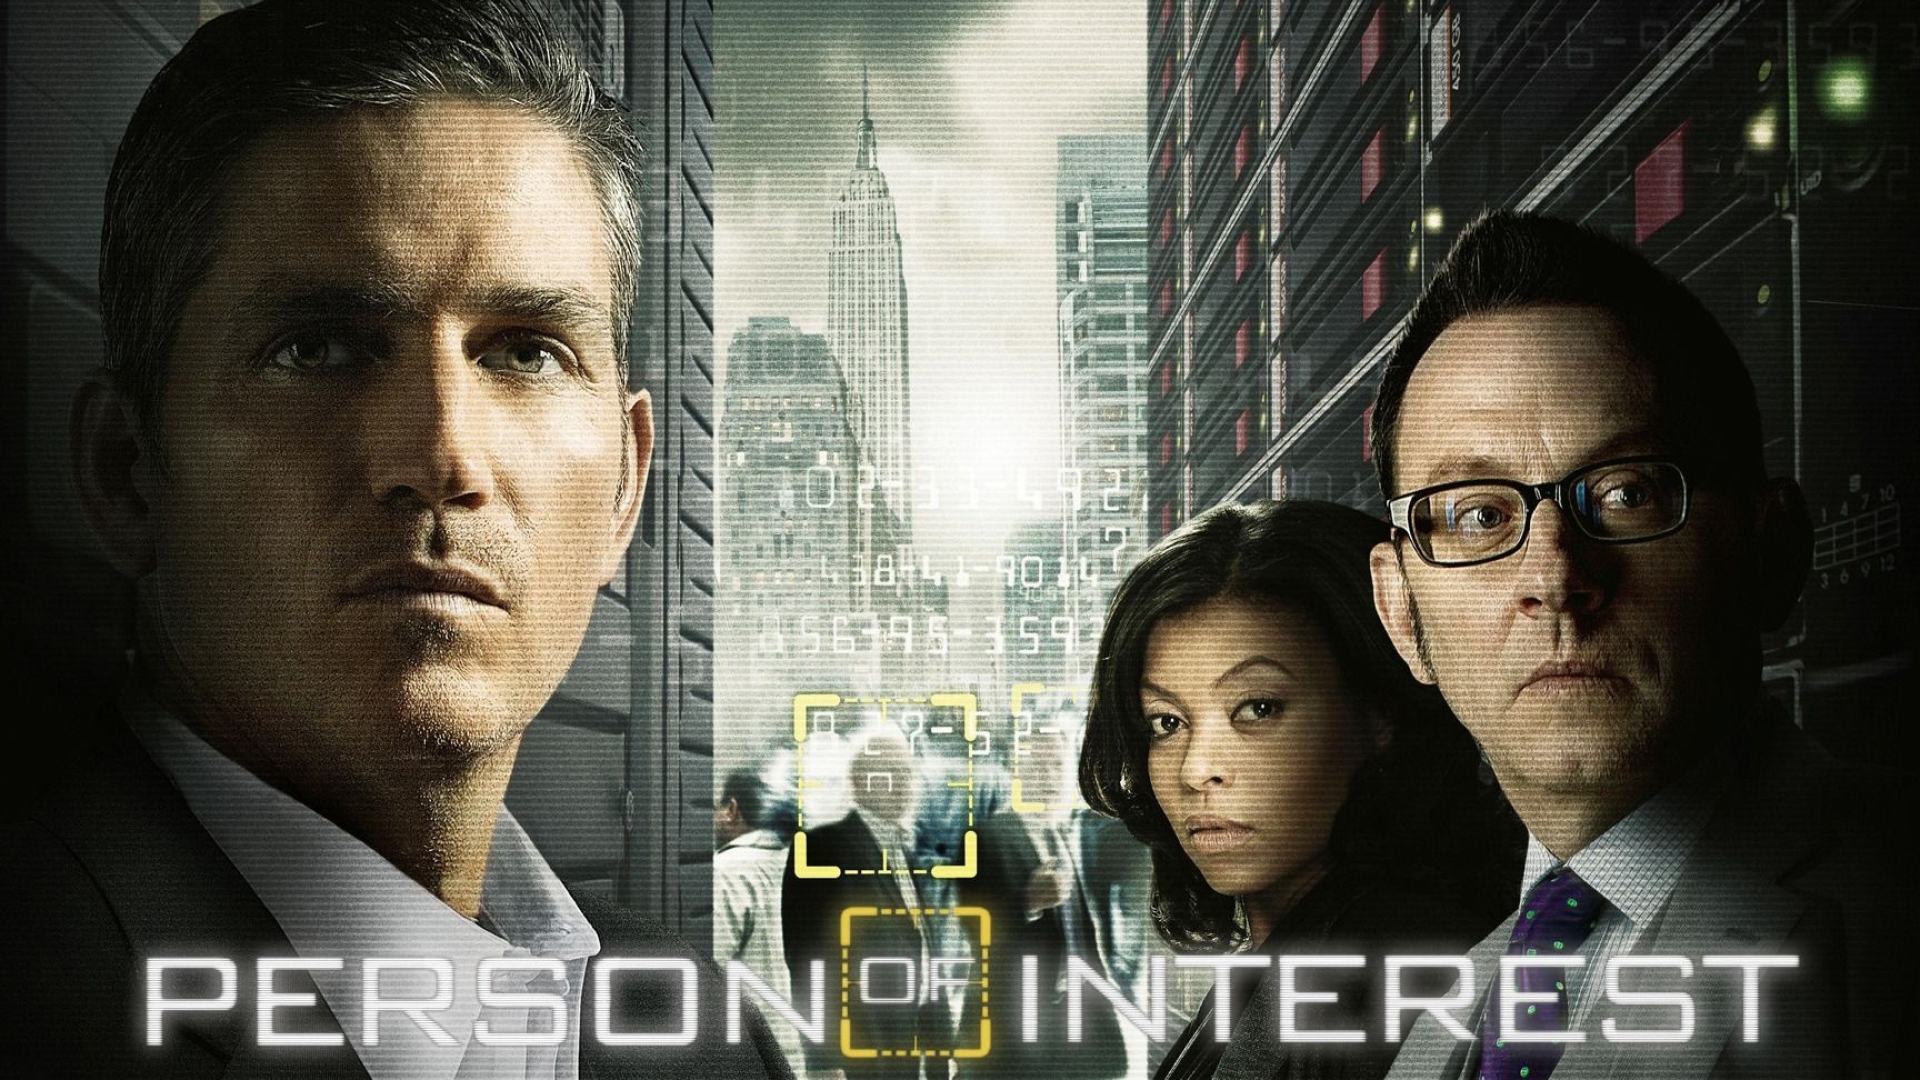 Person of Interest TV series, Memorable wallpapers, Thrilling storyline, Engaging characters, 1920x1080 Full HD Desktop